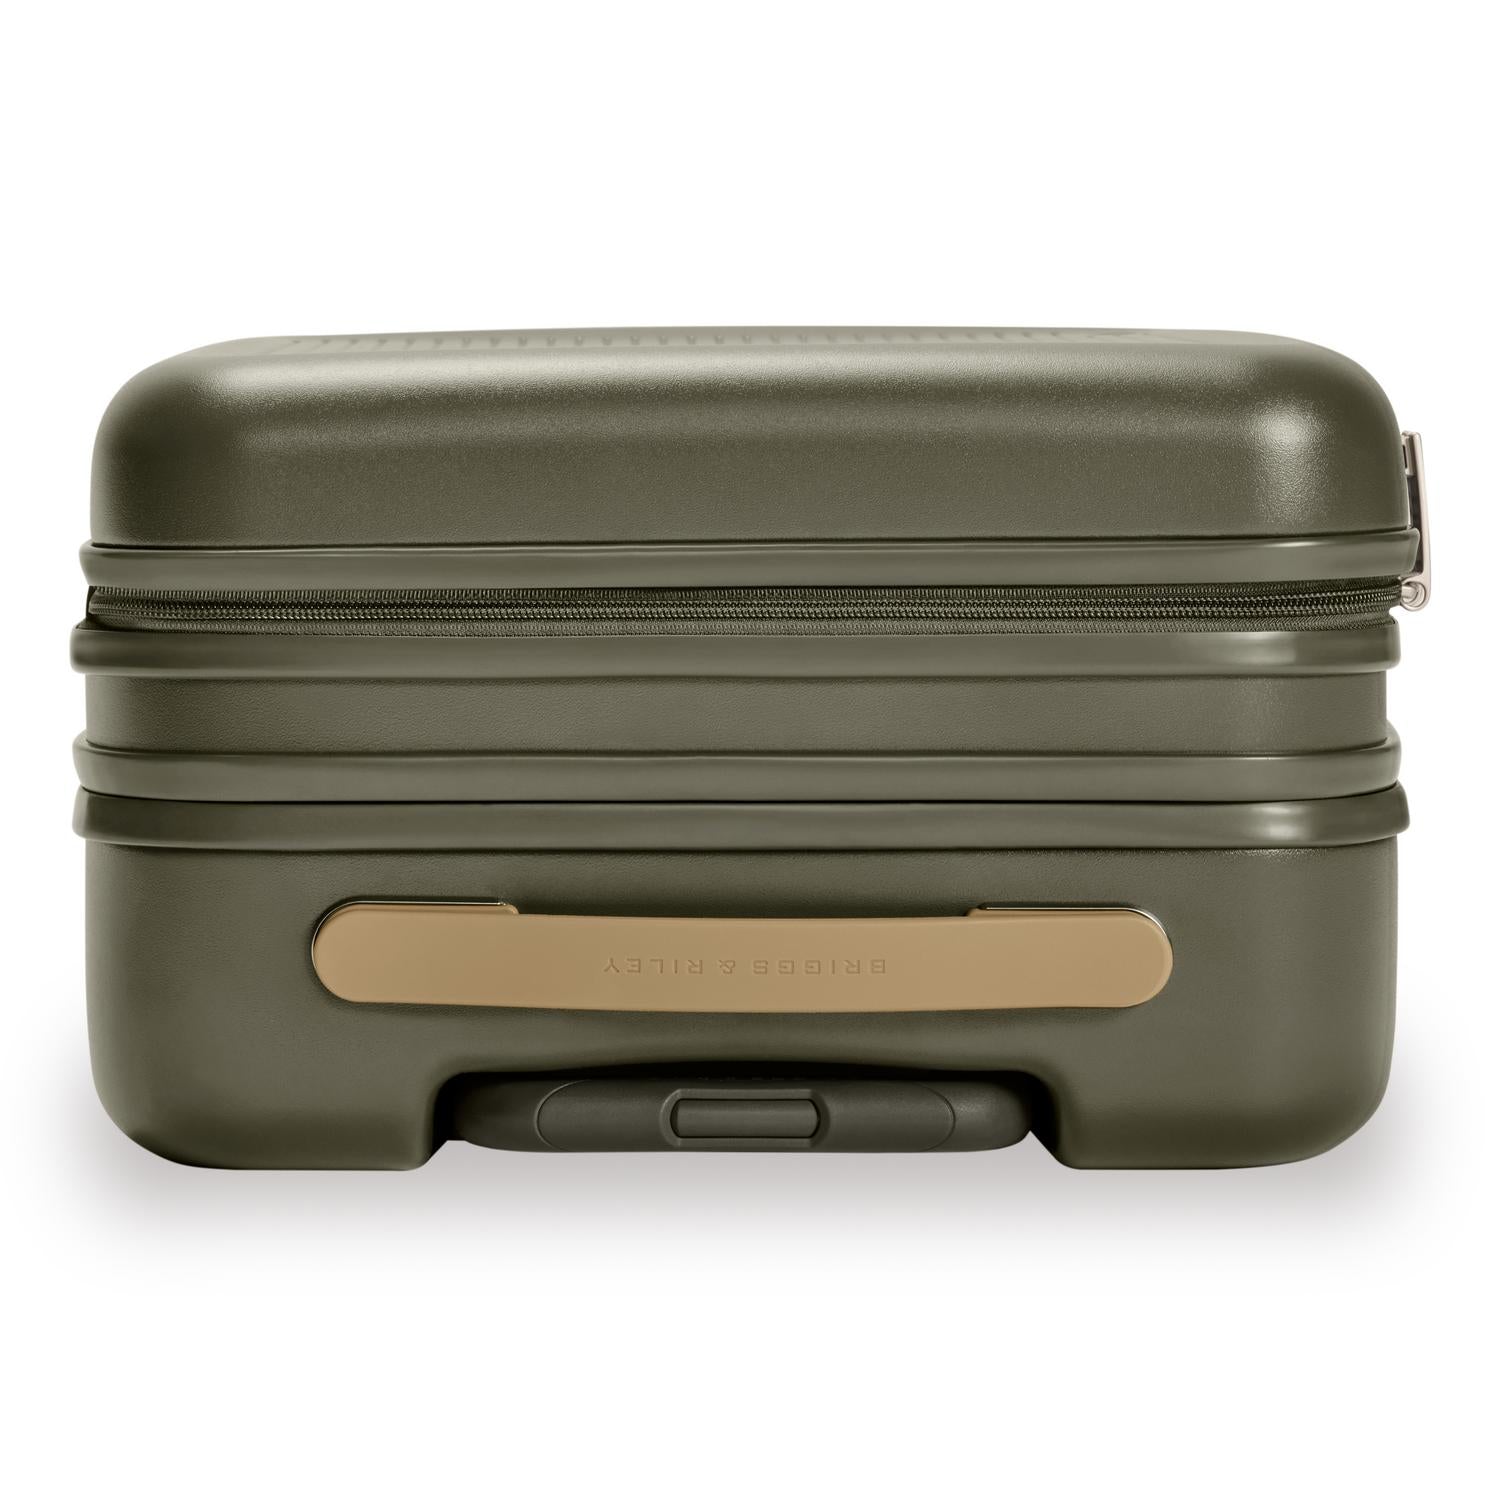 Global Carry-On Expandable Spinner in Olive, Top View #color_olive